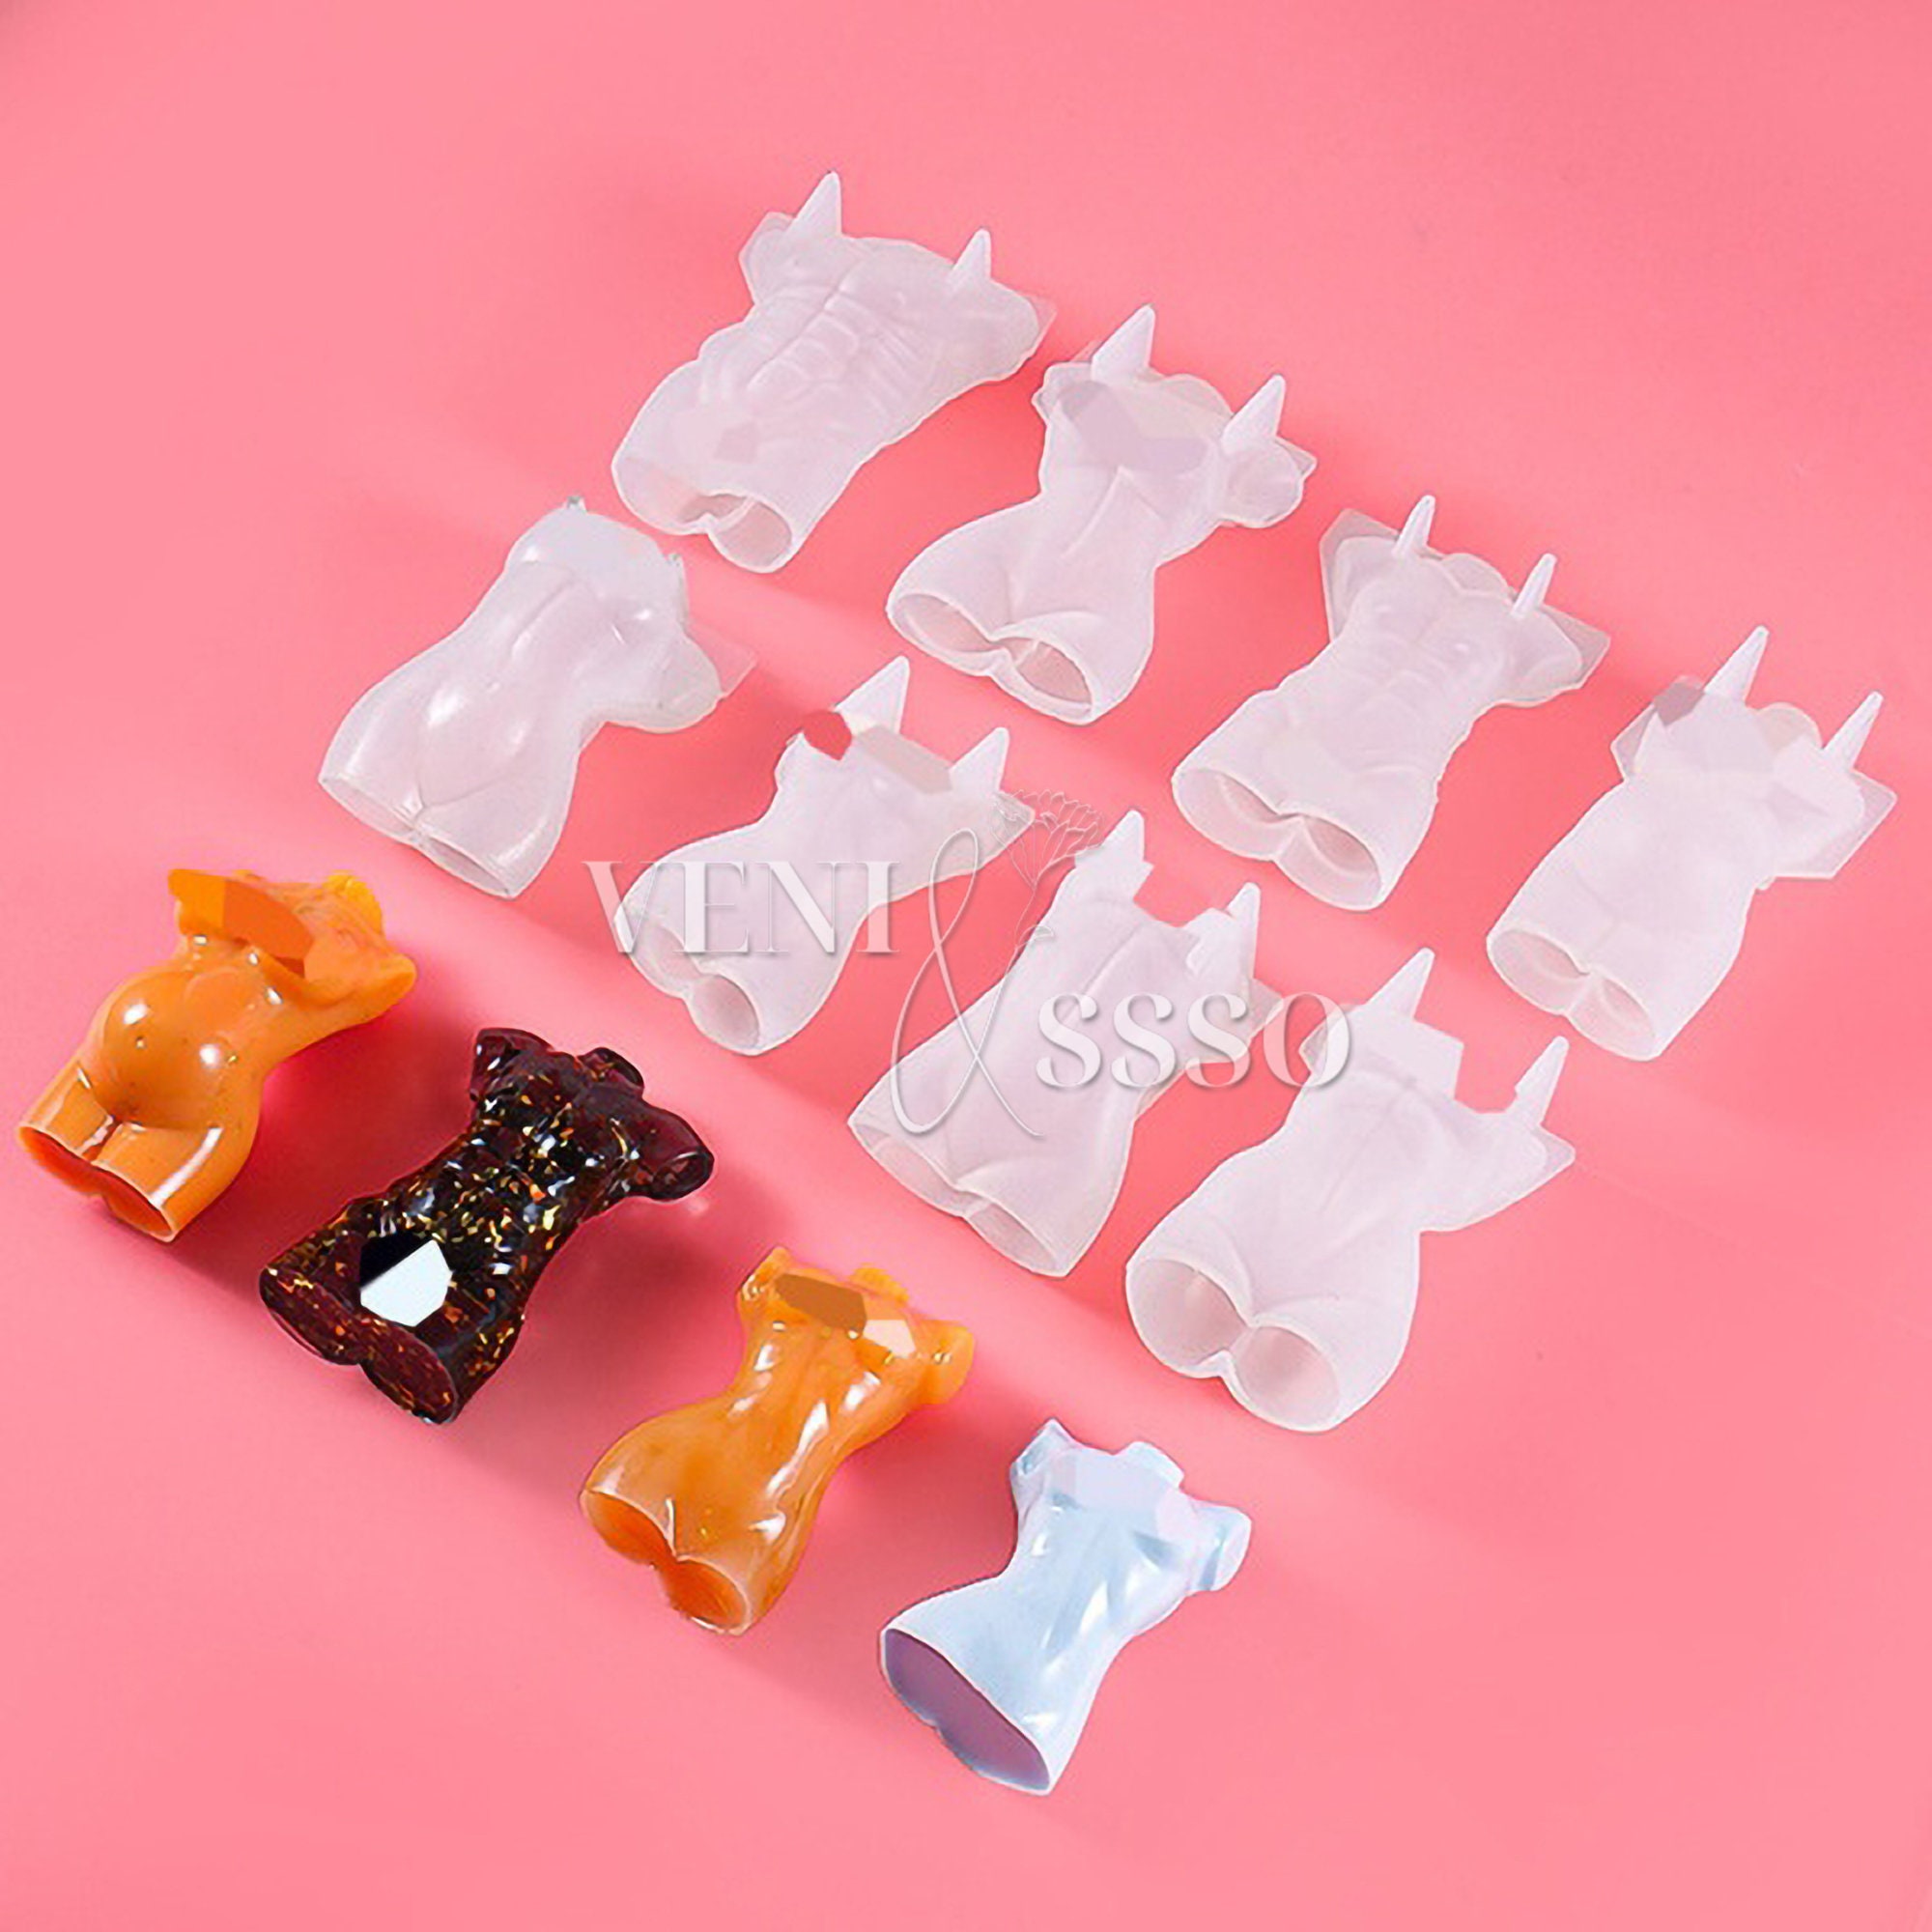 EJWQWQE Candle Molds For Candle Making, Silicone Candle Resin